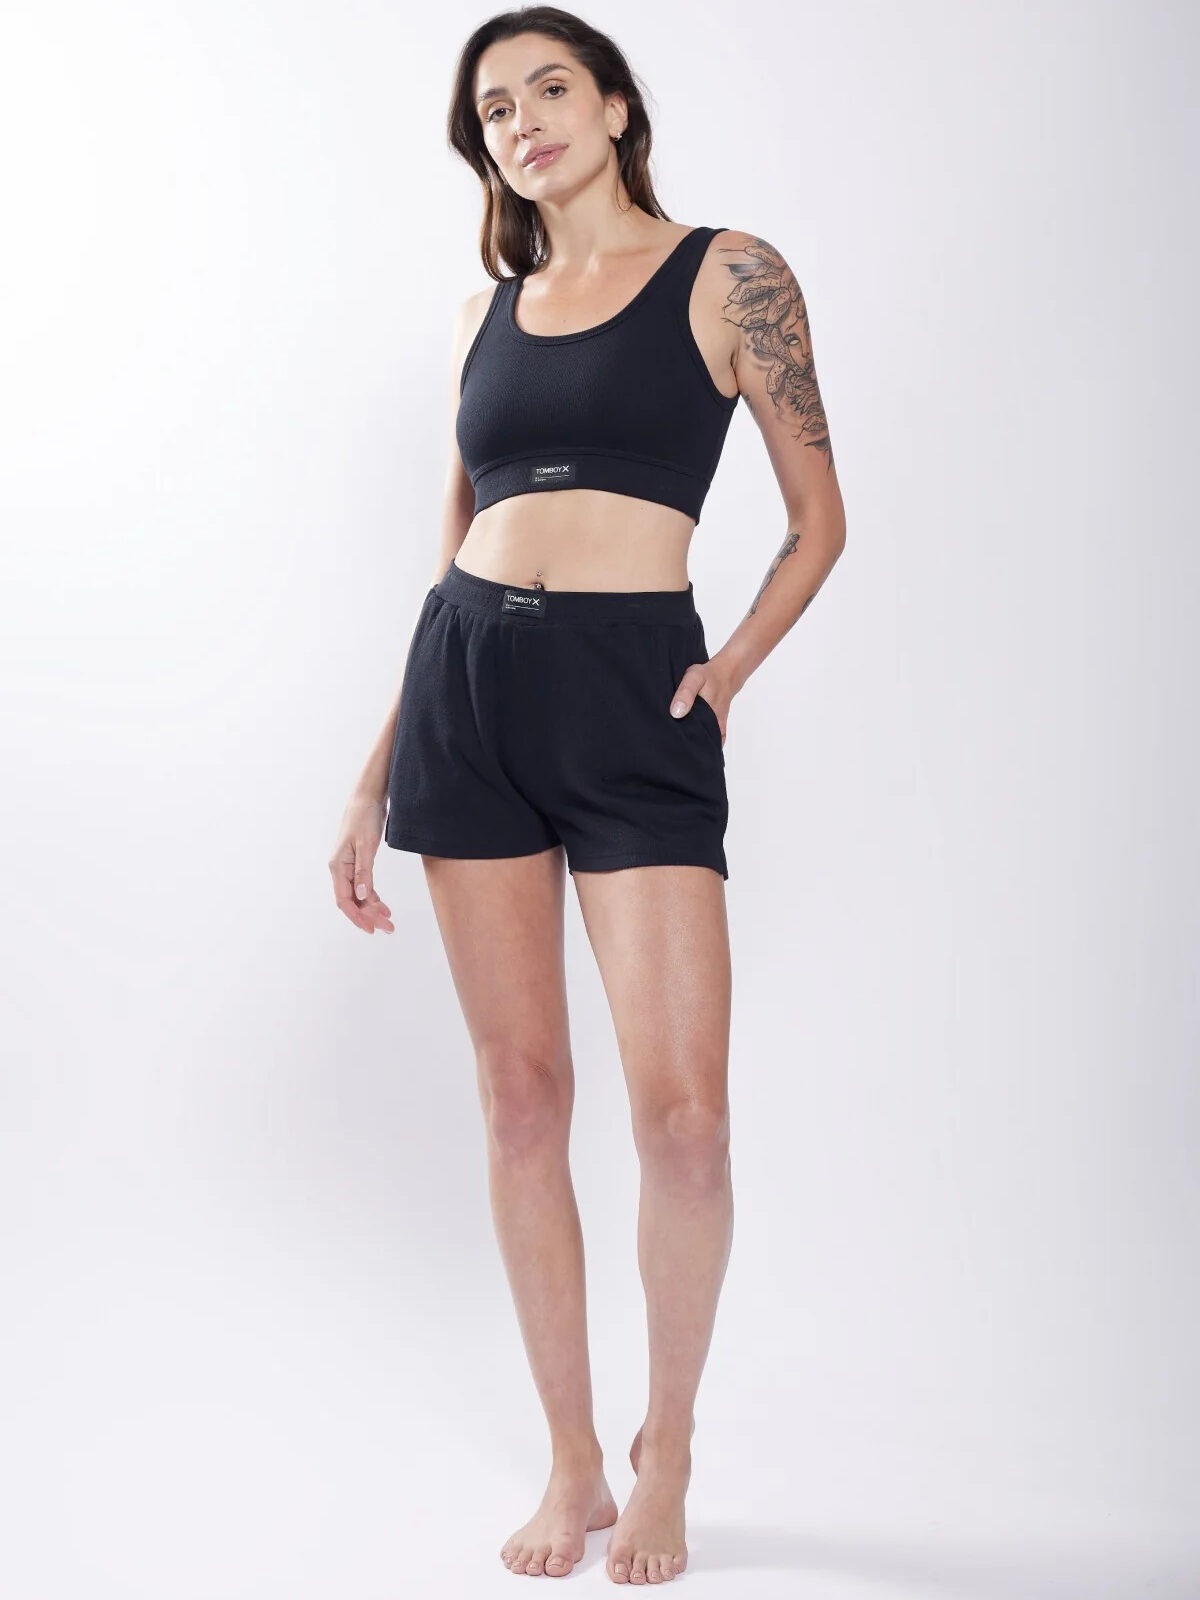 A woman wearing black shorts and a black tank top.